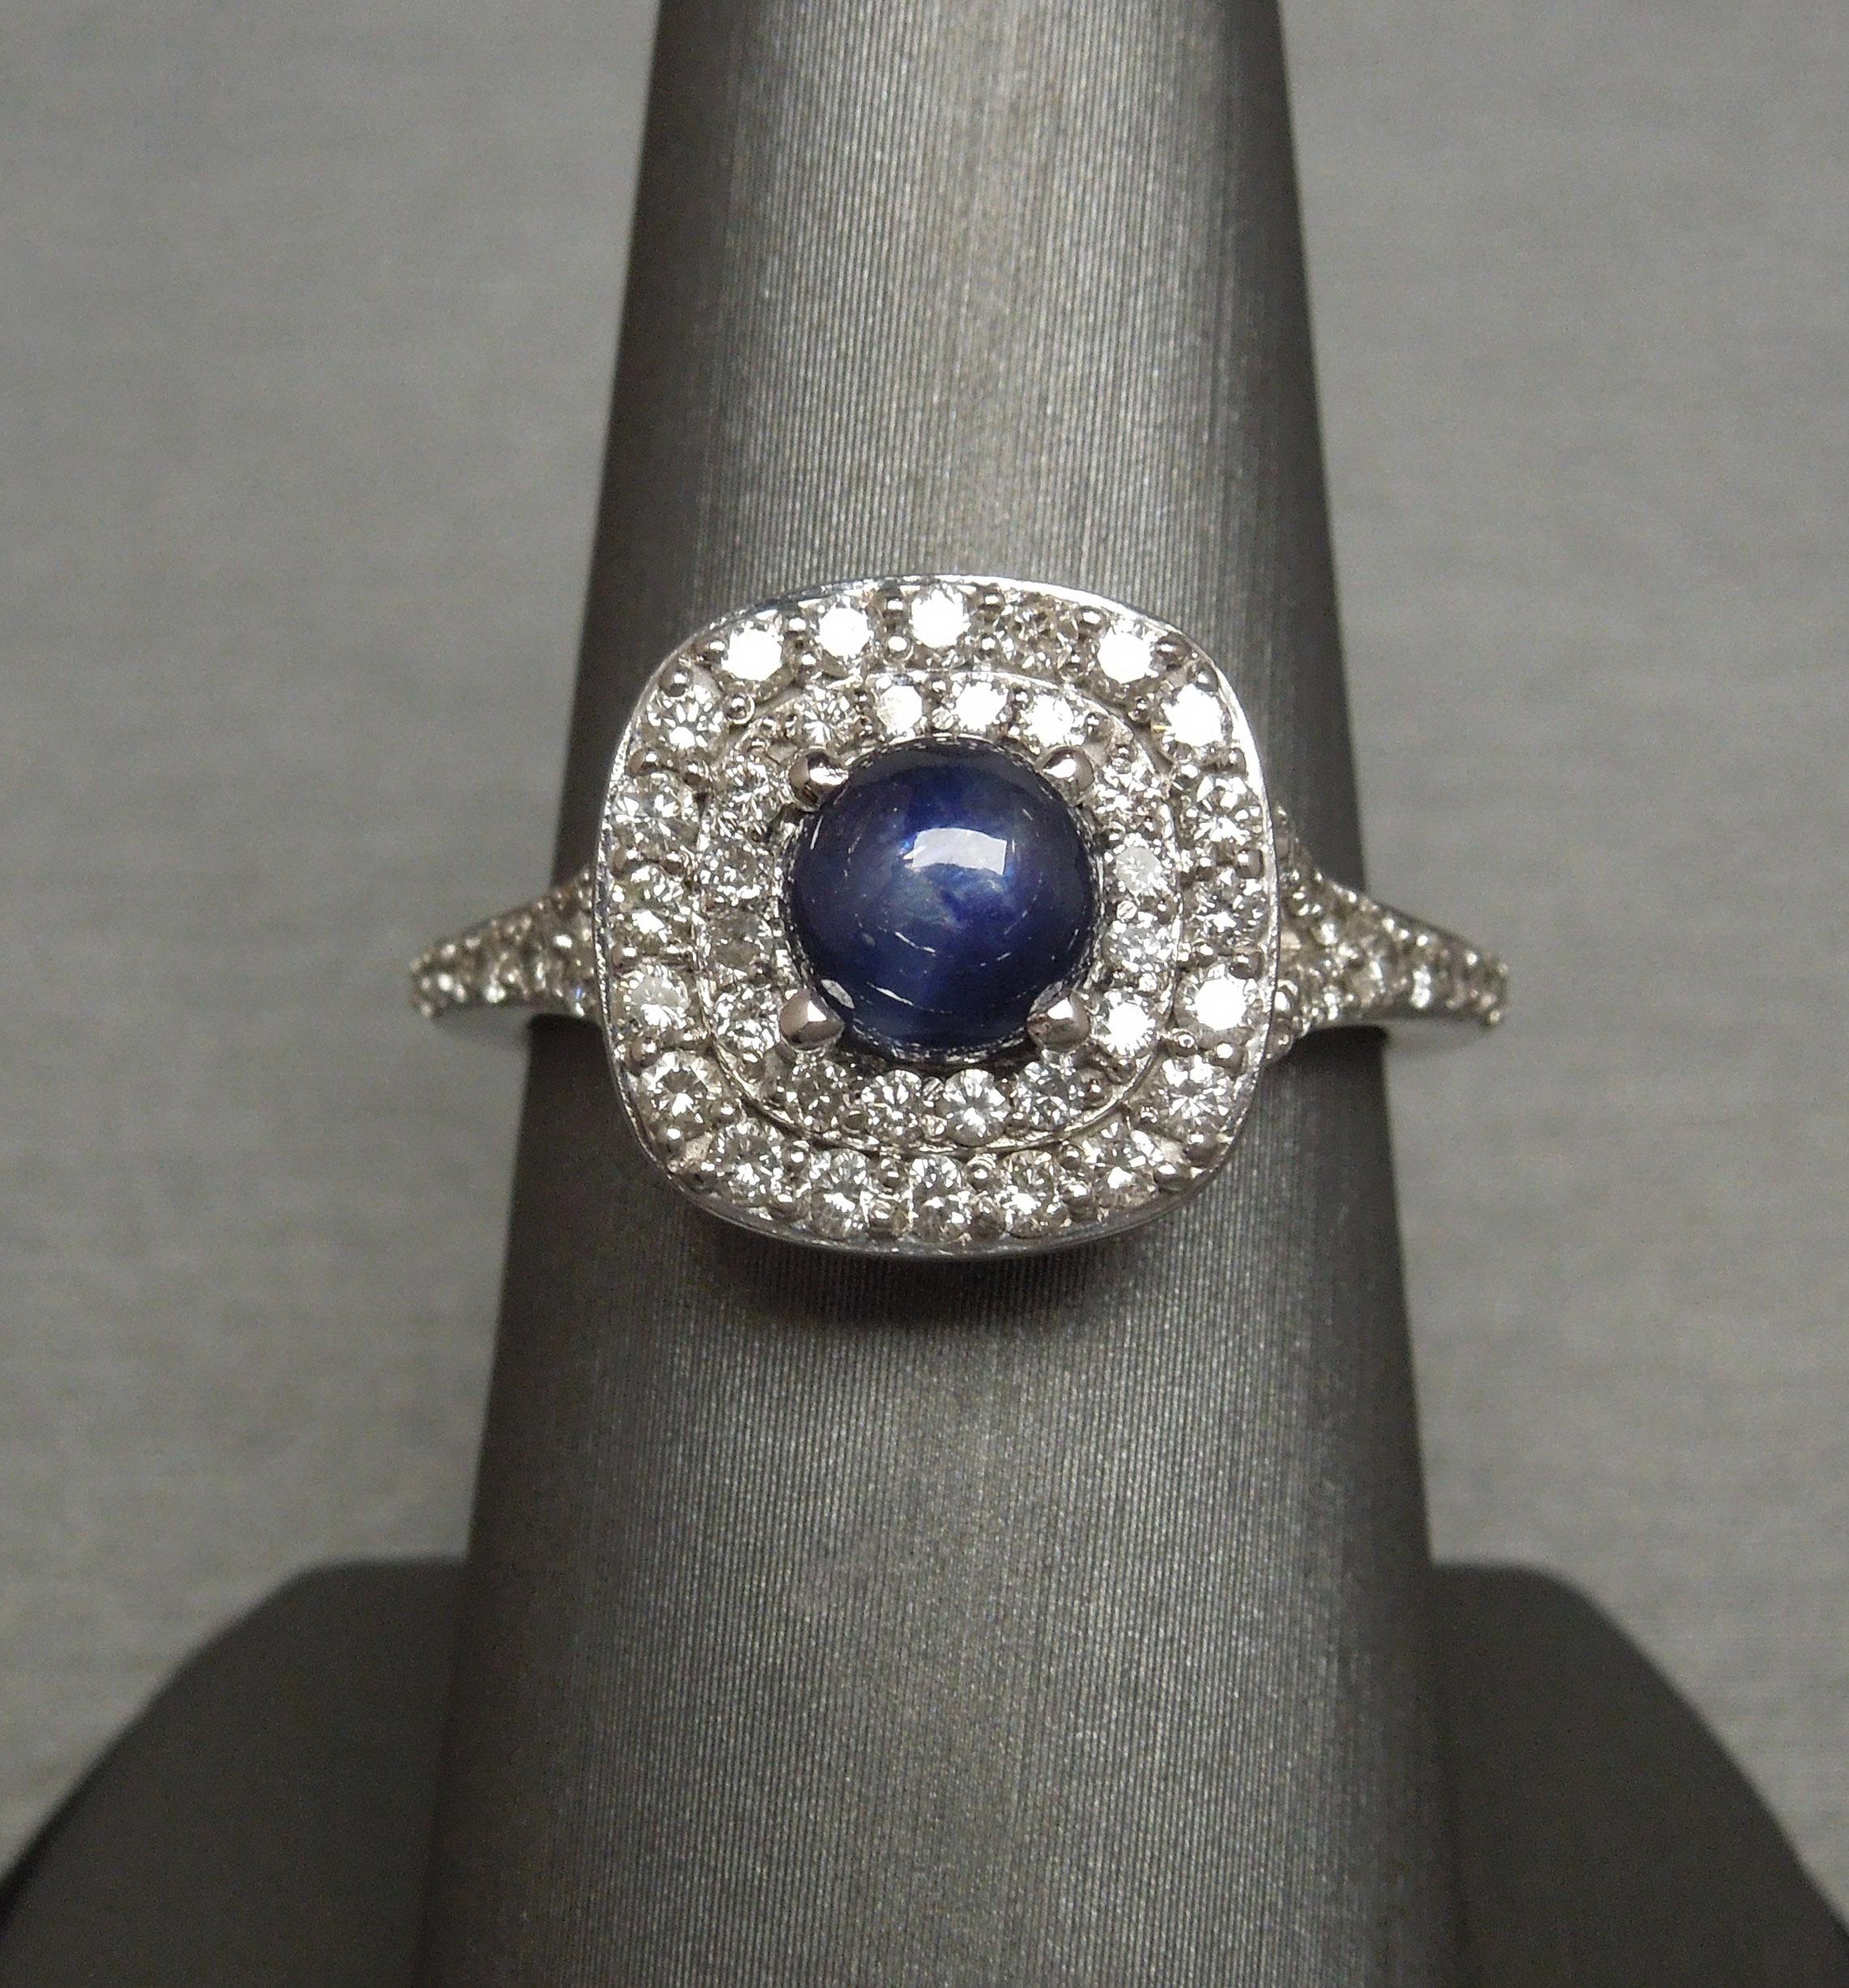 This Sapphire & Diamond Halo Ring features a central Round Cabochon cut 1.58 carat Iridescent Blue Sapphire at 5.9mm in diameter, secured in a 4-prong setting - with slight indications of striation [natural inclusions coming up to surface of stone,